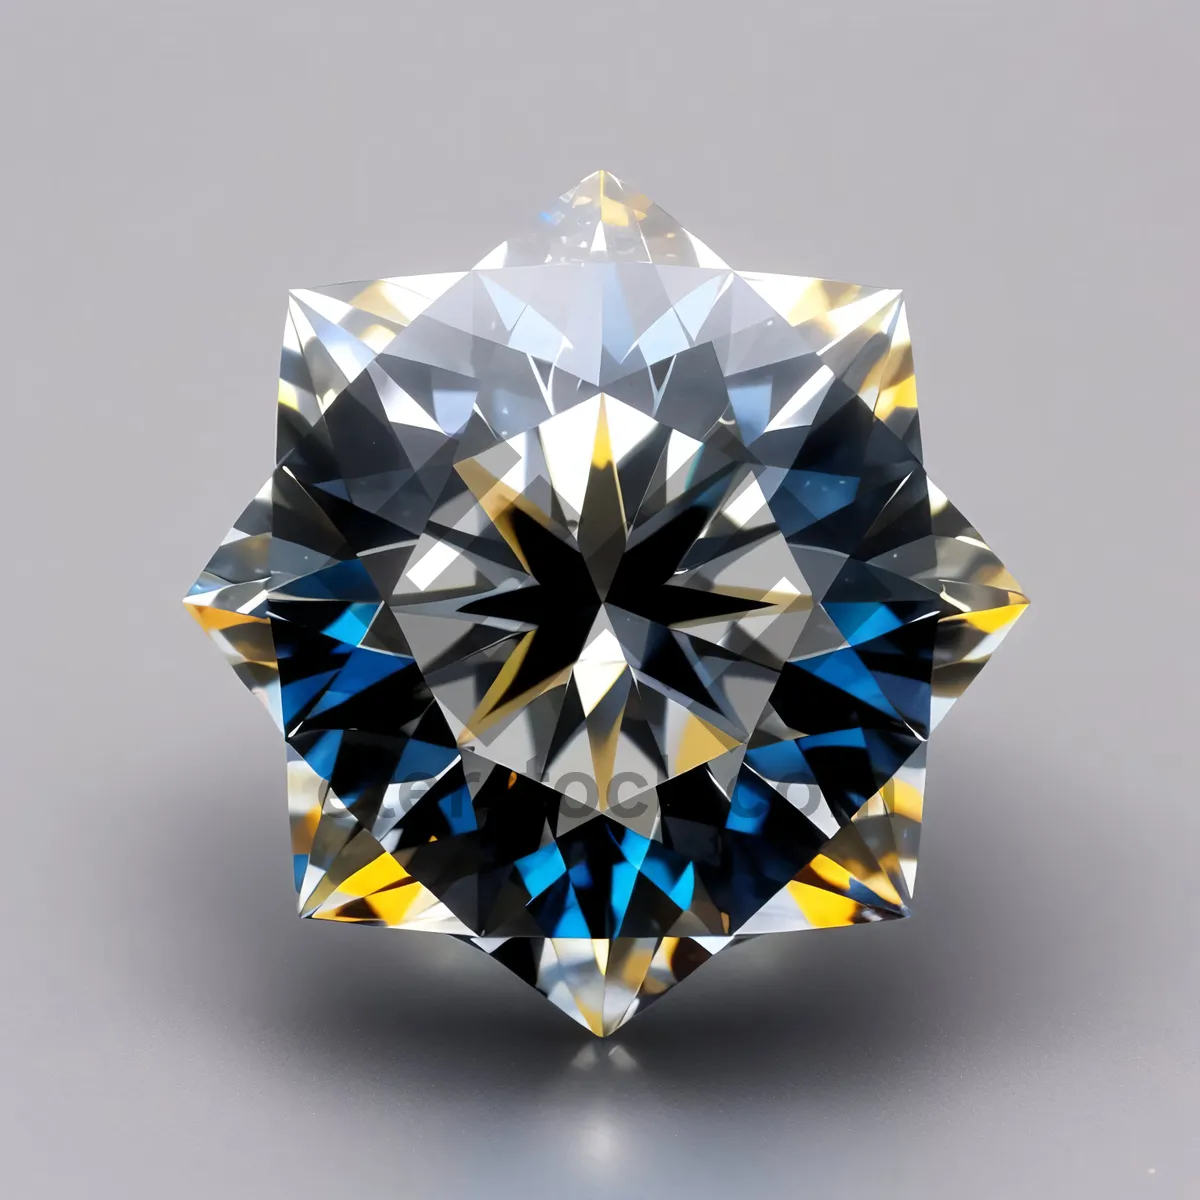 Picture of Brilliant Crystal Diamond: A Solid Gem Gift